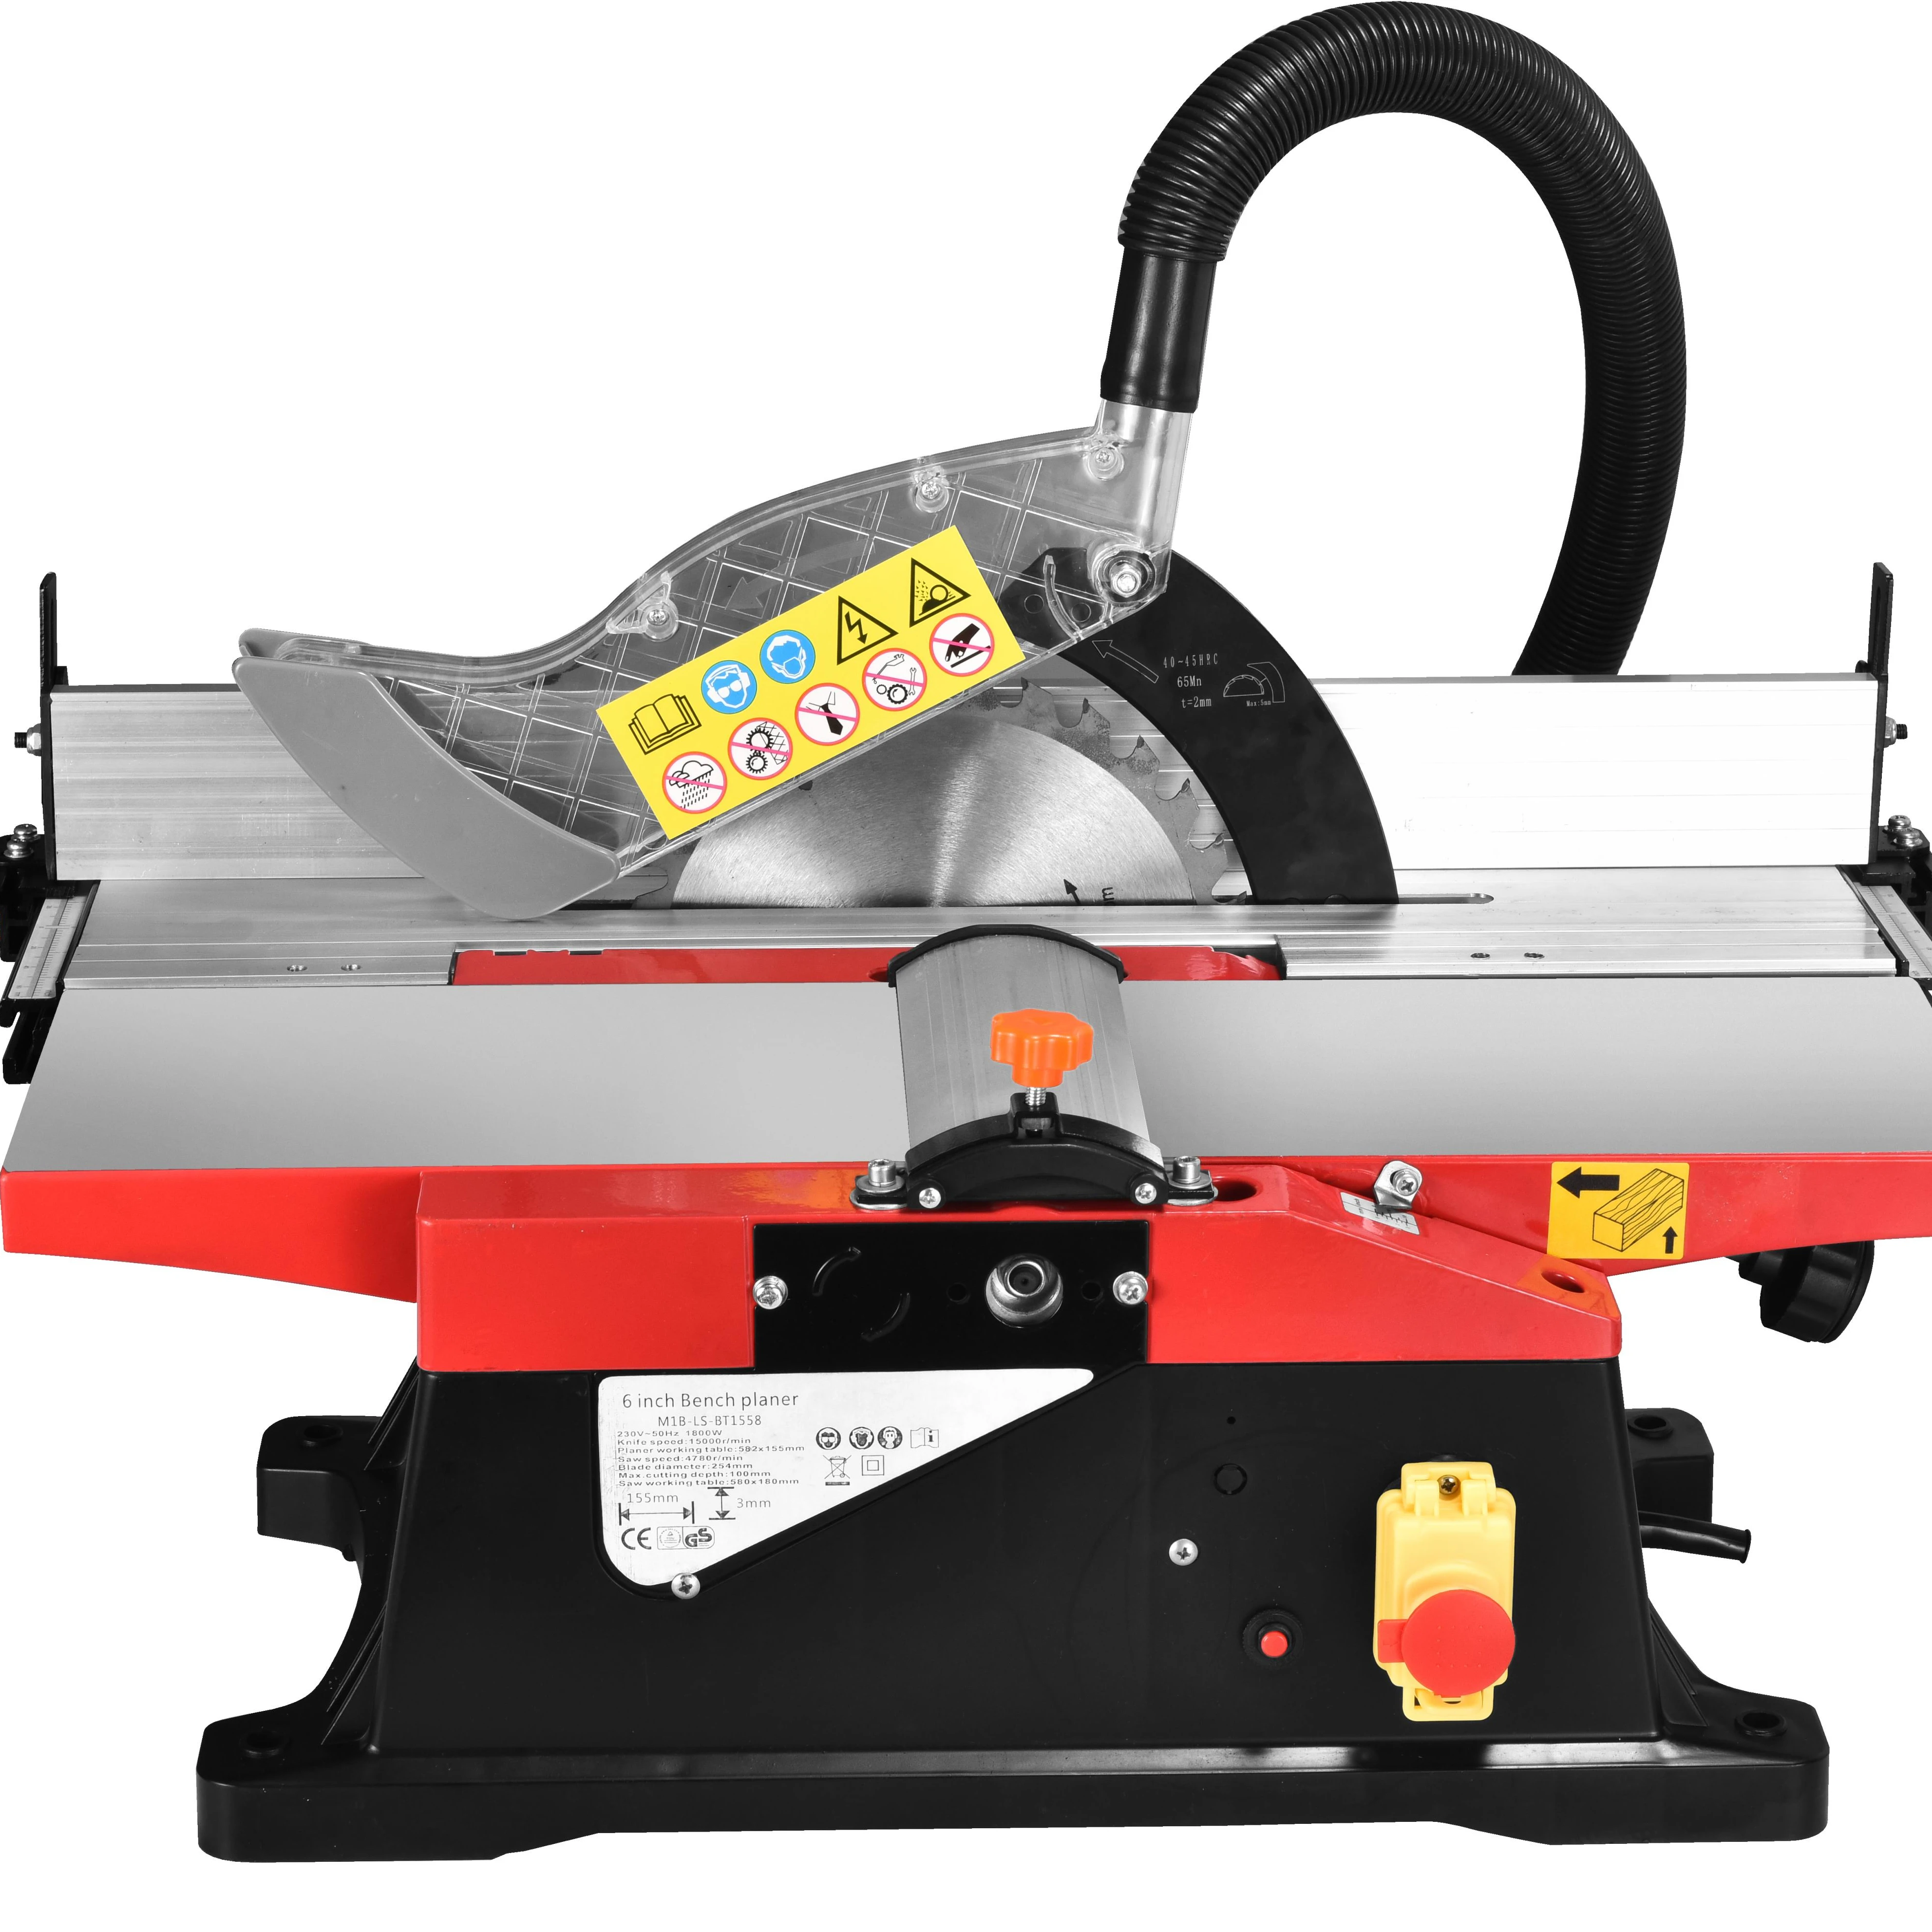 

6 inch 1800W combined woodworking machine 155mm max planing width bench planer and saw for woodworking